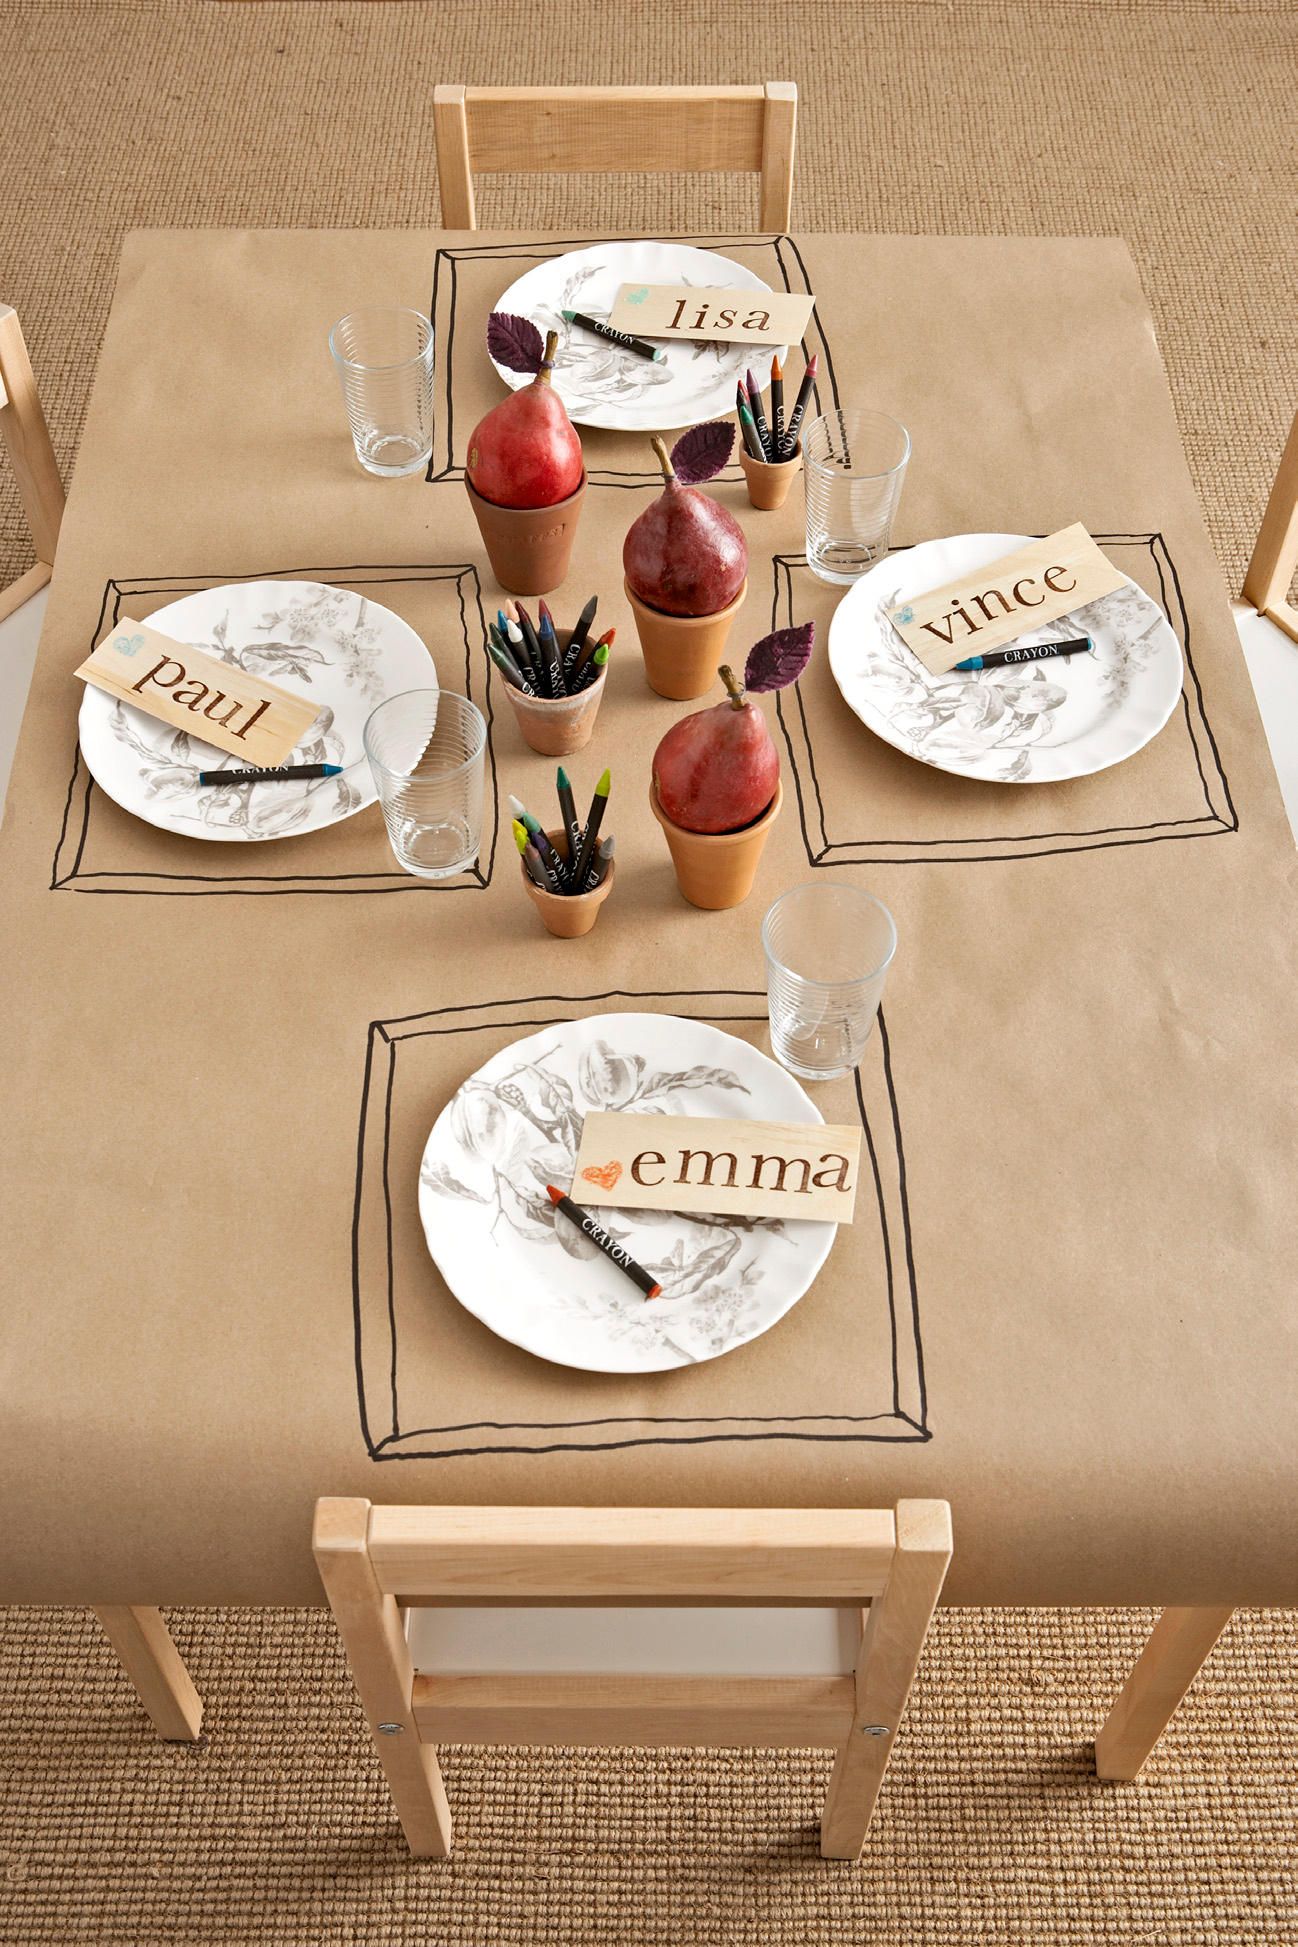 65 Diy Thanksgiving Table Setting Ideas, Pictures Of Dining Room Place Settings